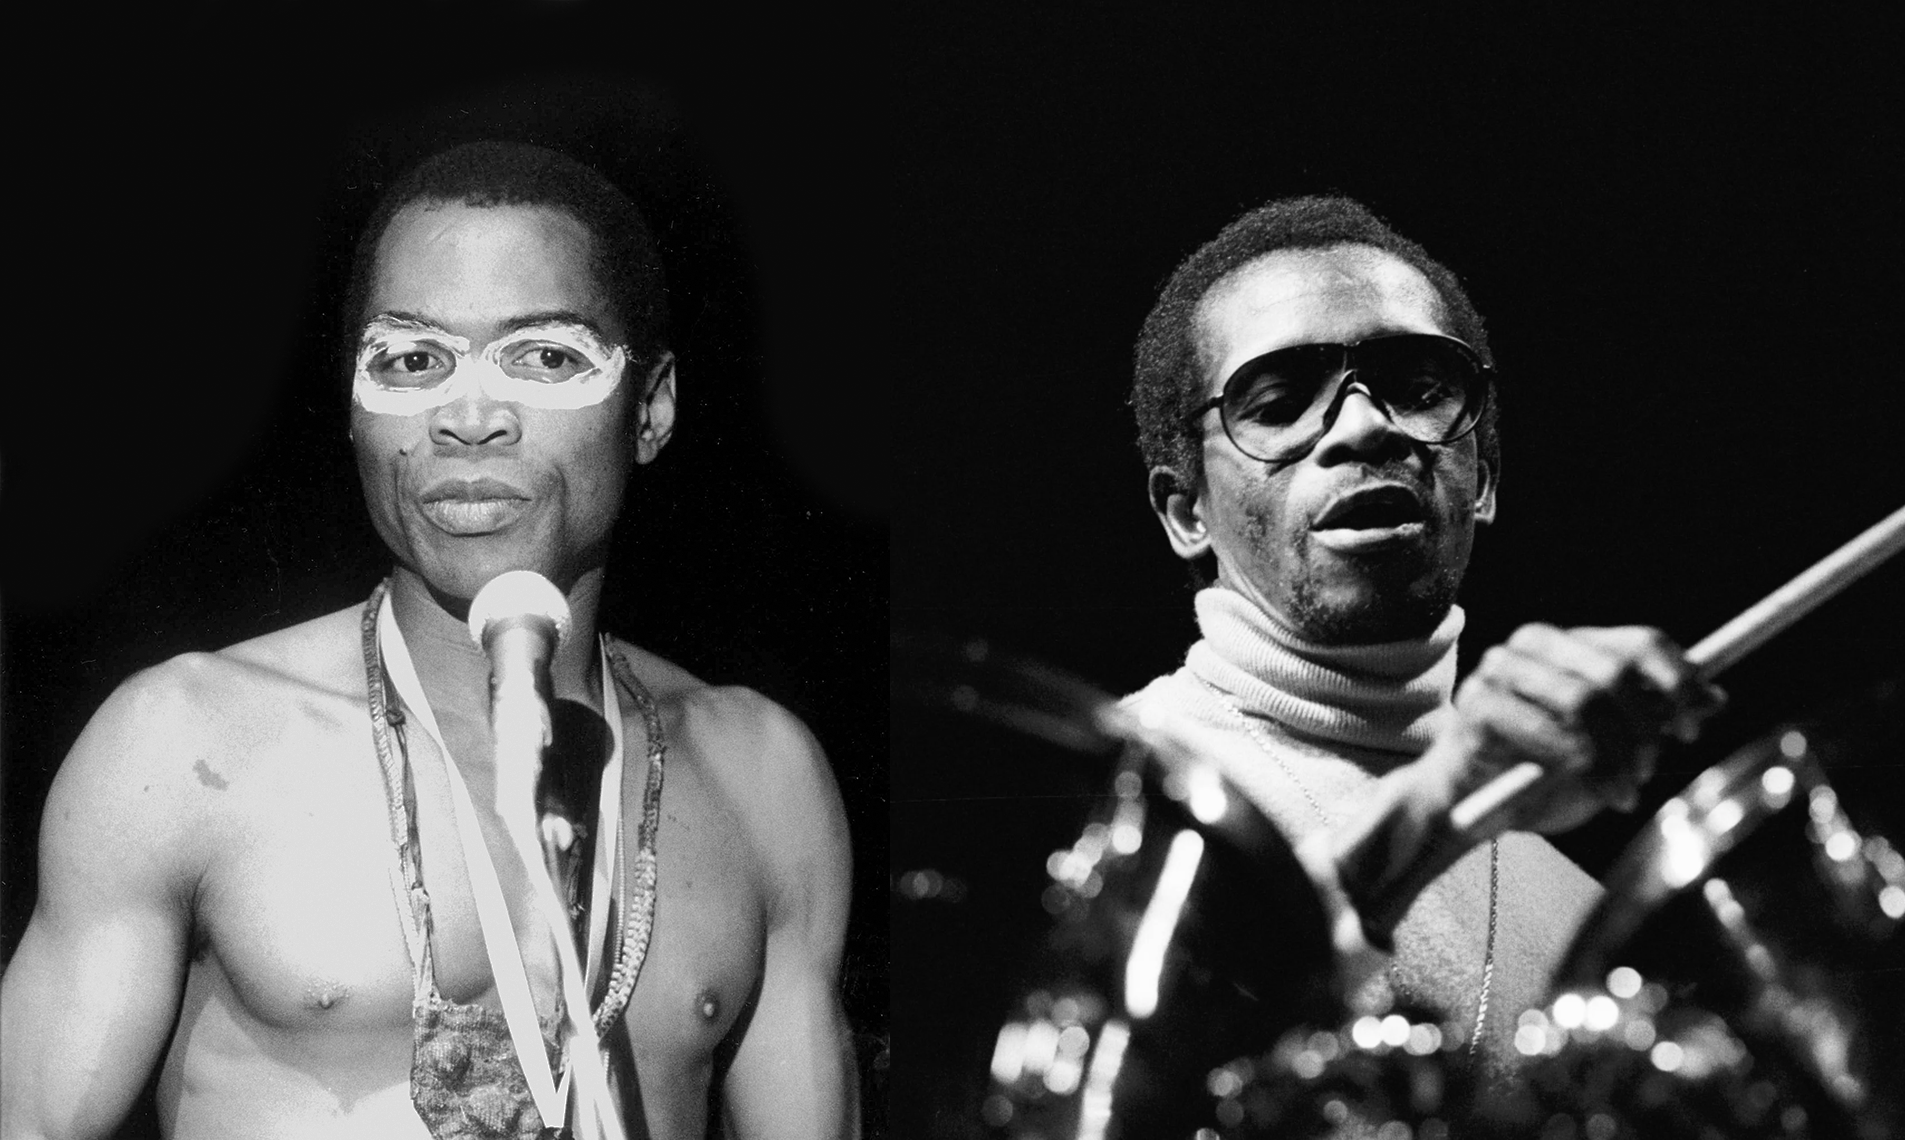 Fela Kuti and Tony Allen archive photos in black and white.